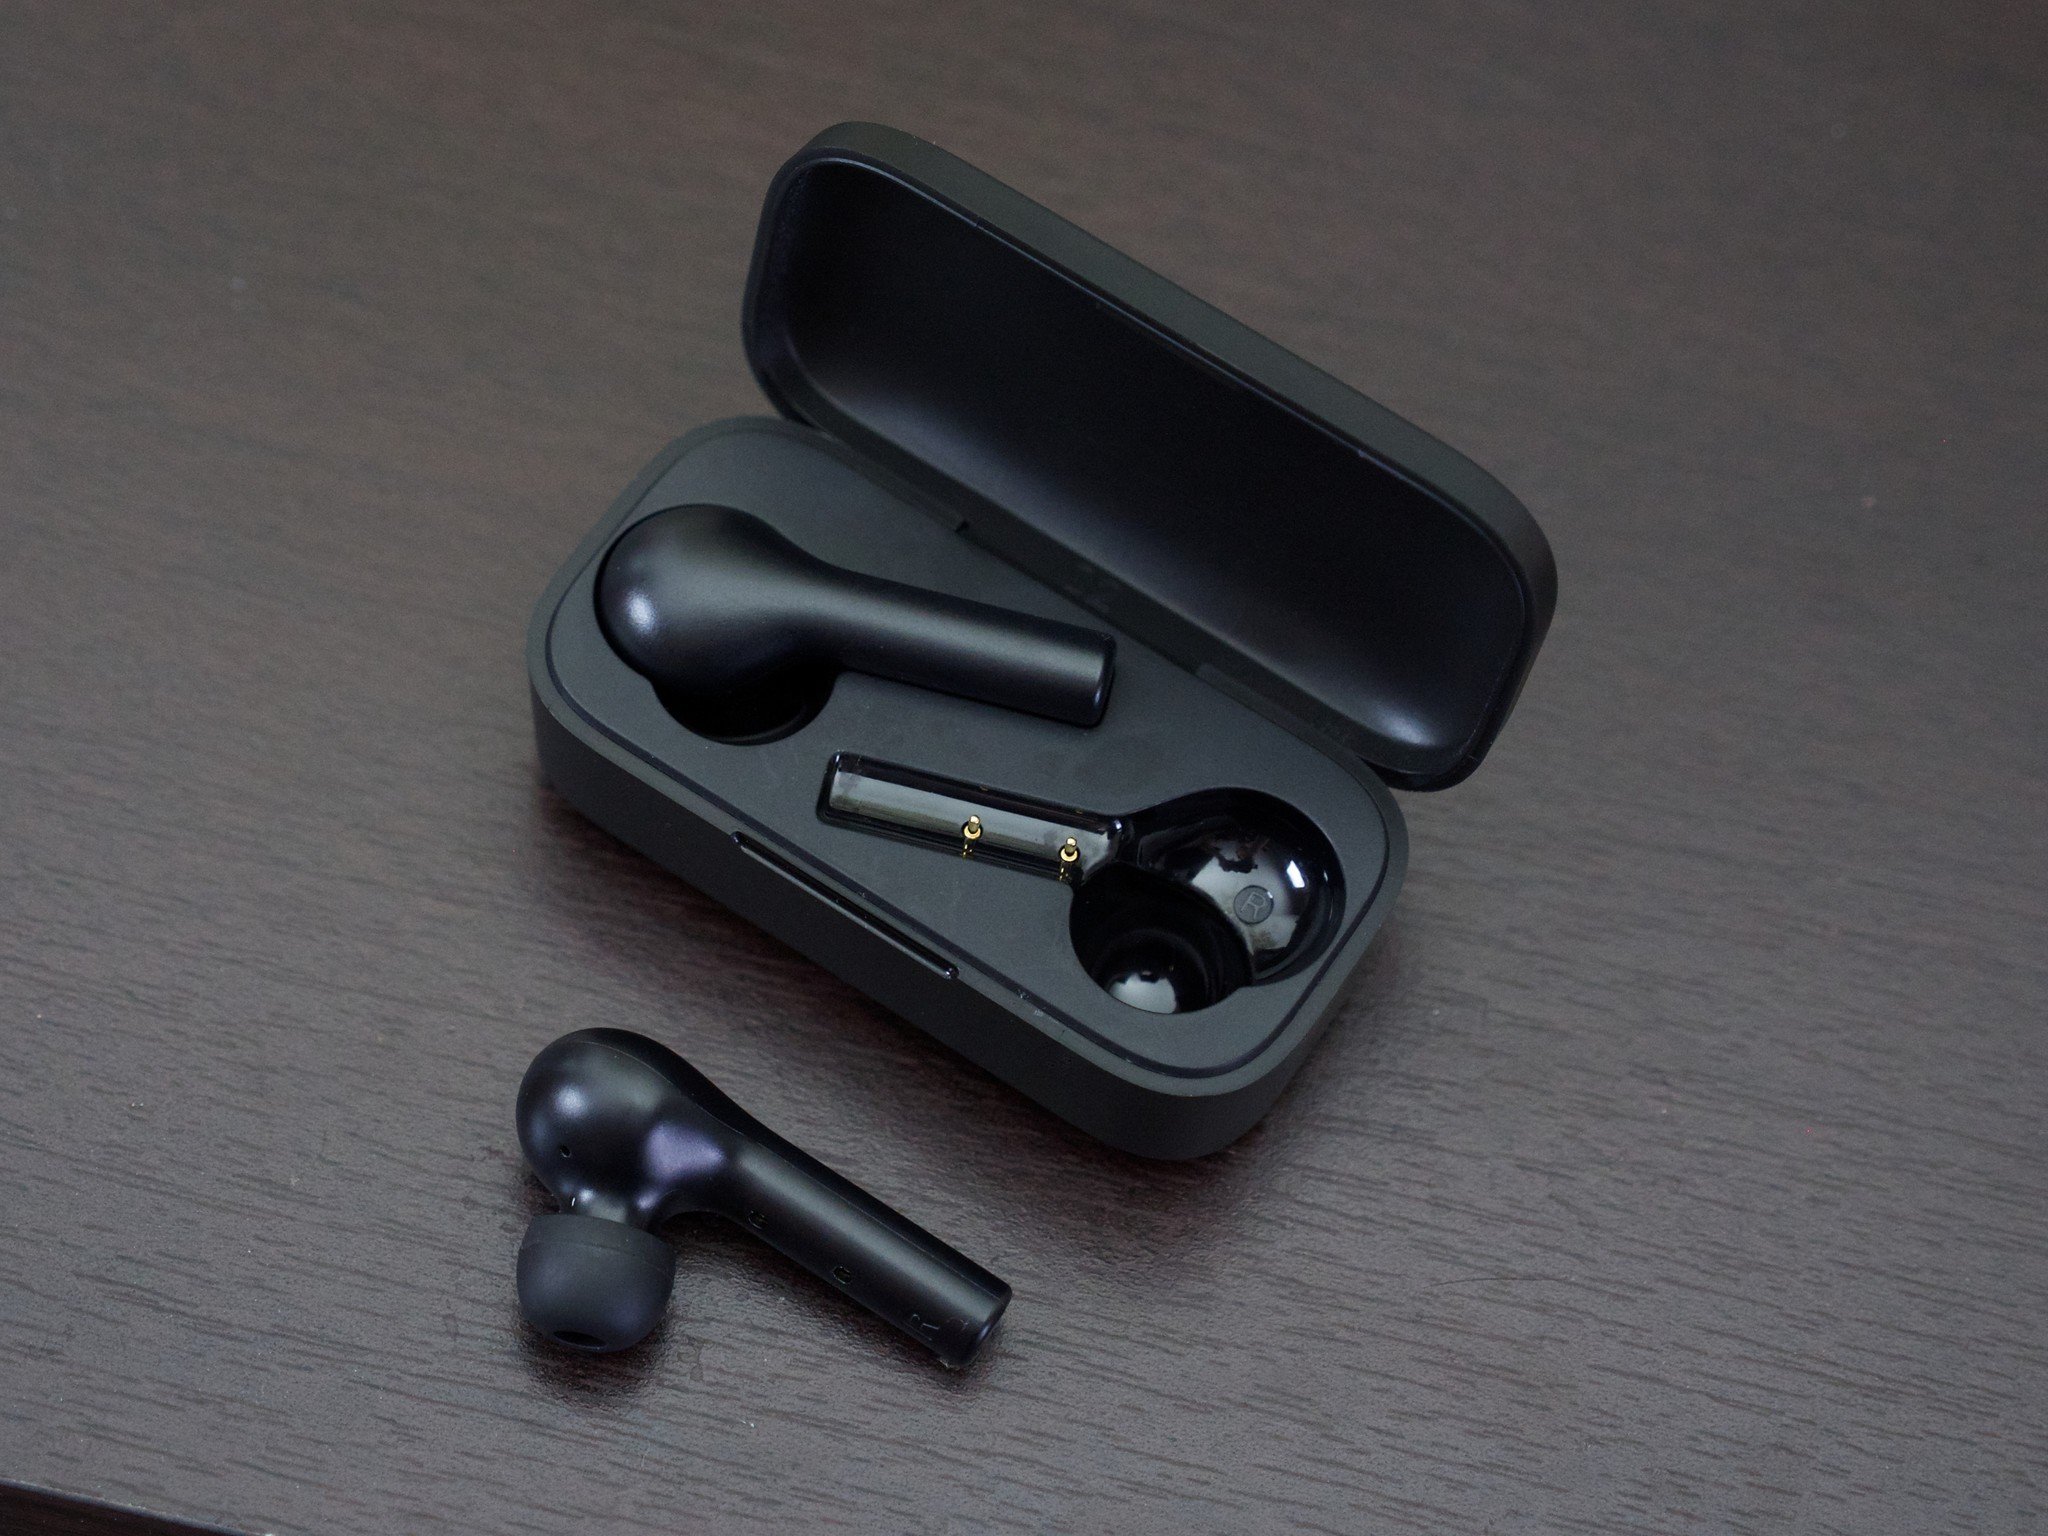 EP-T21 review: true wireless earbuds actually want to use | Android